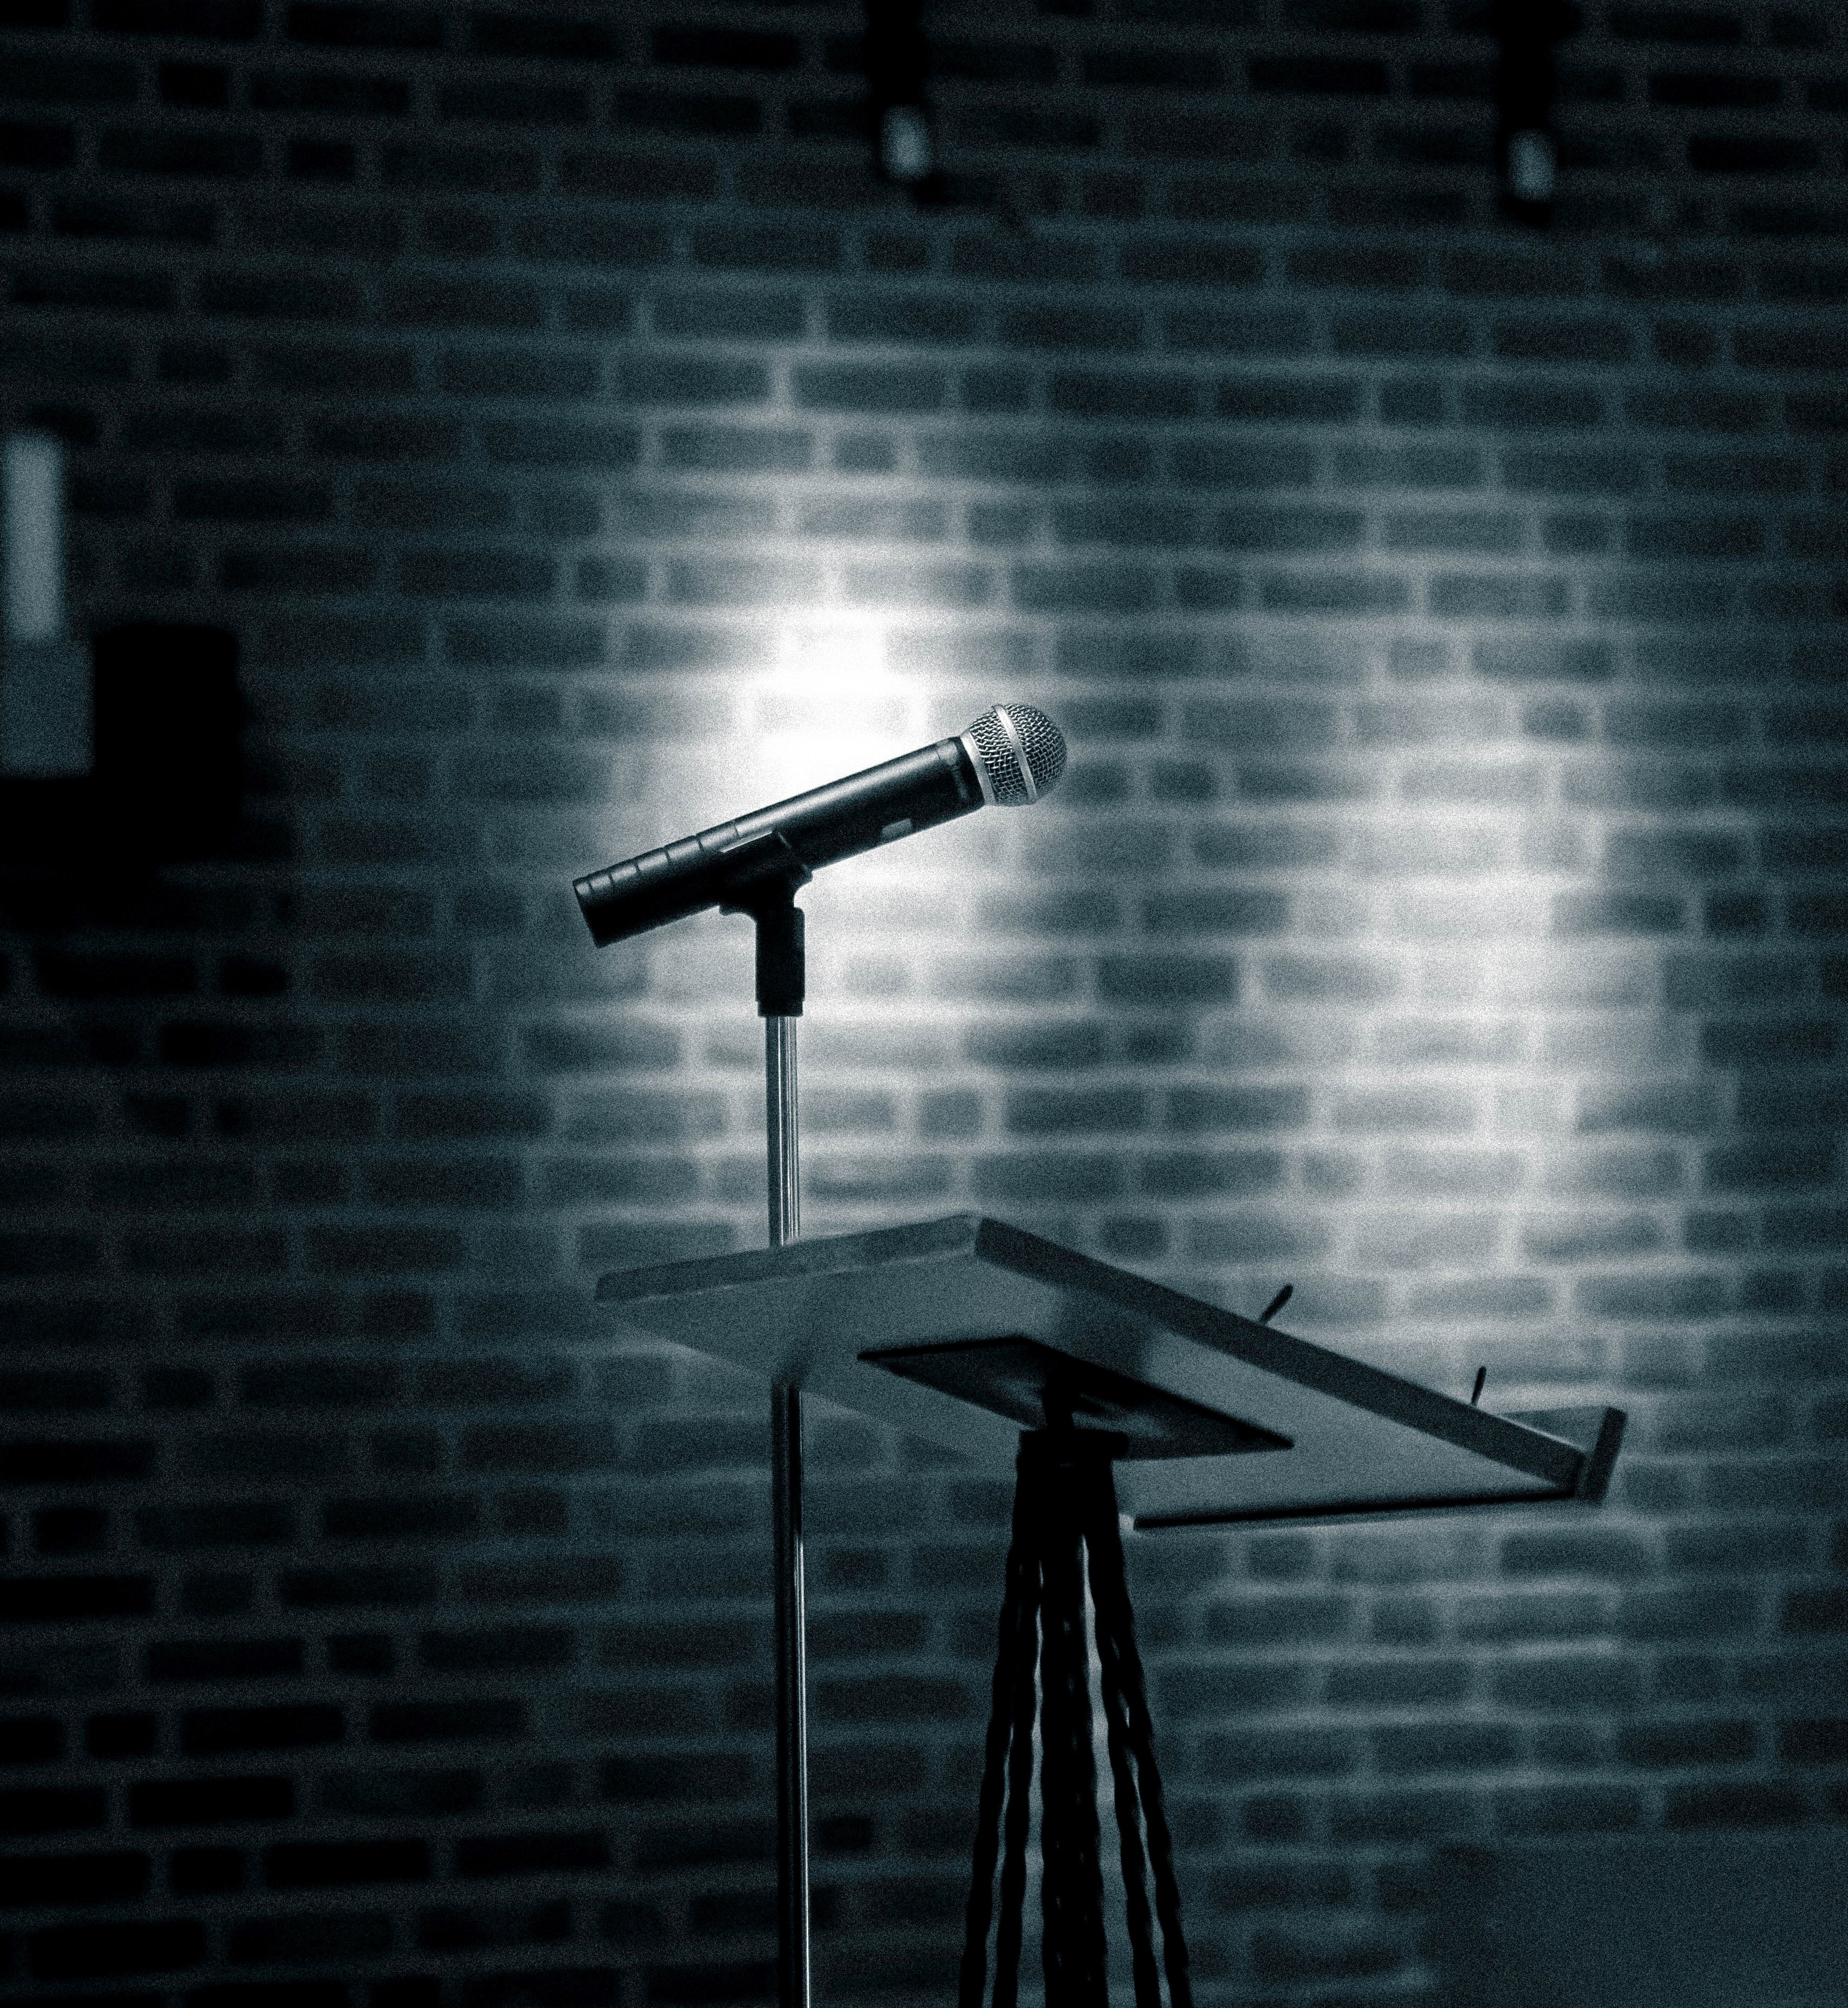 microphone and podium on an empty stage